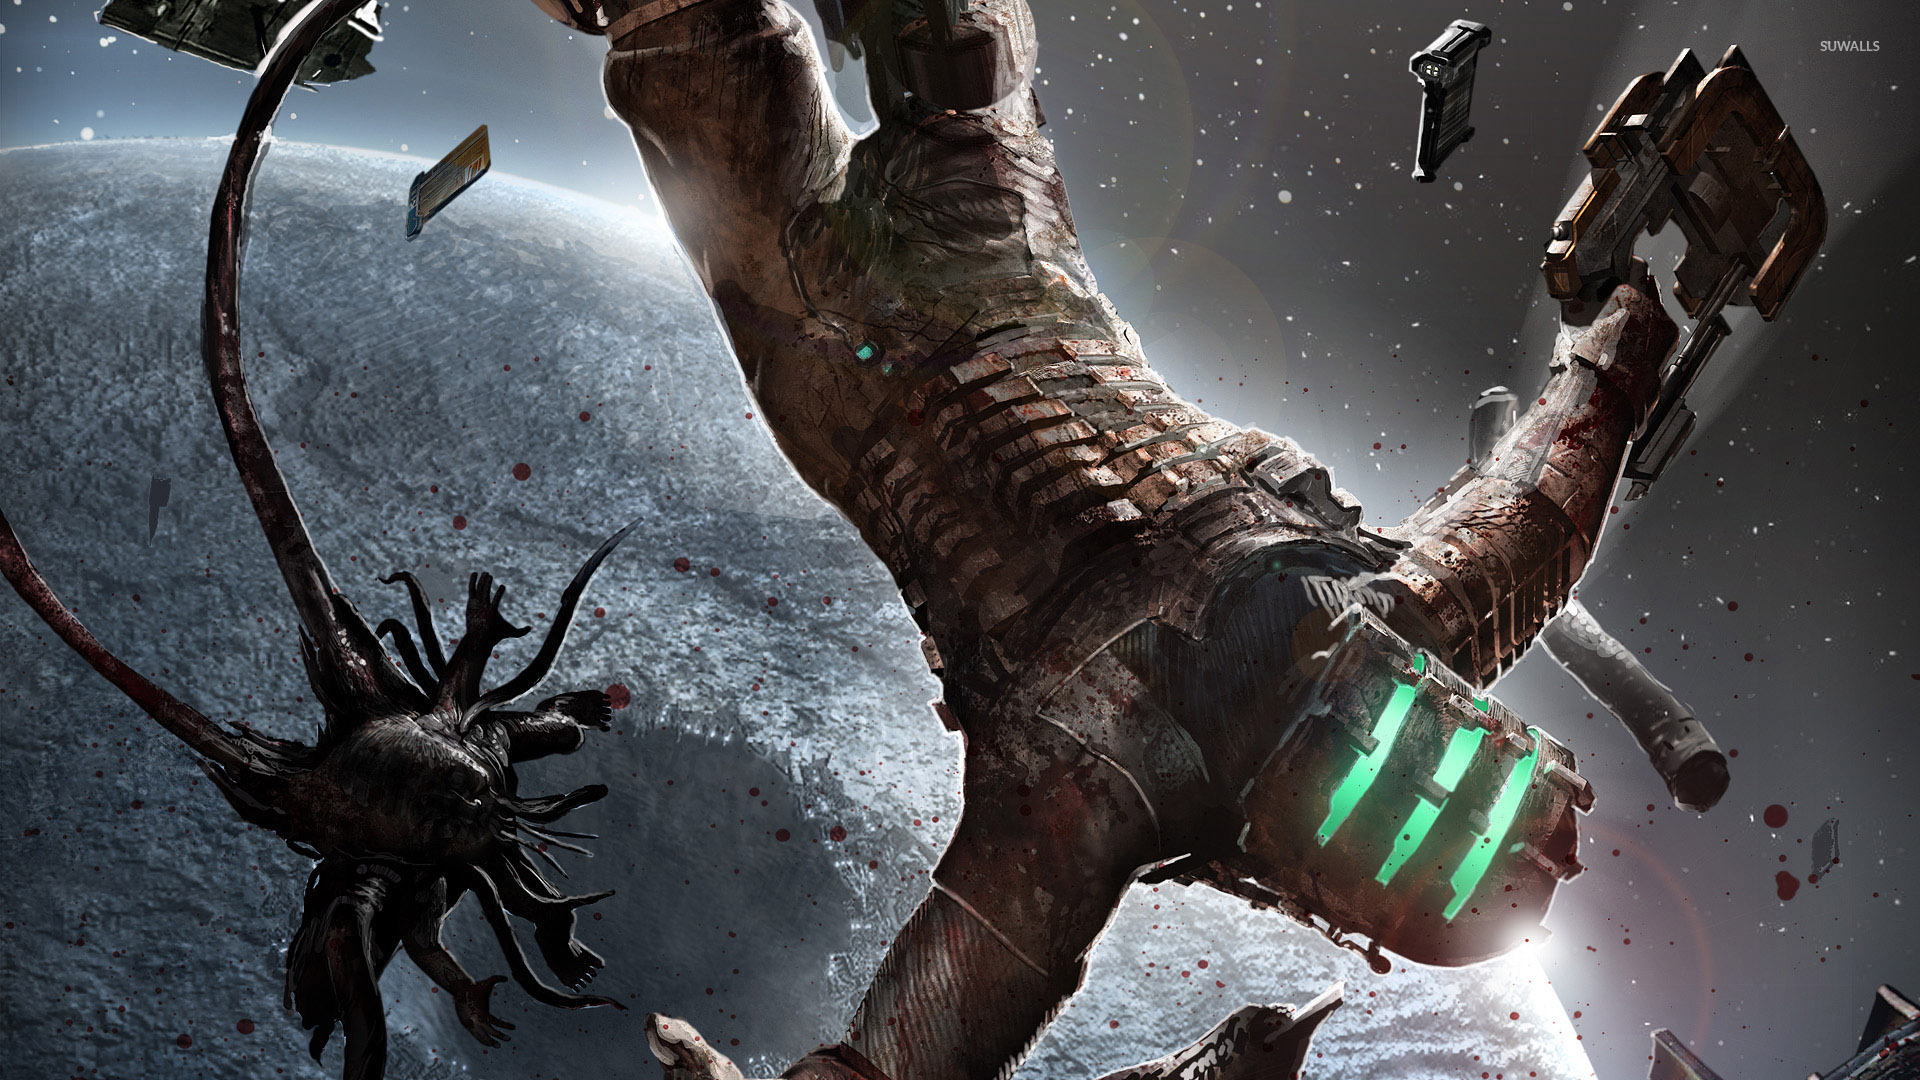 dead space remake ps4 download